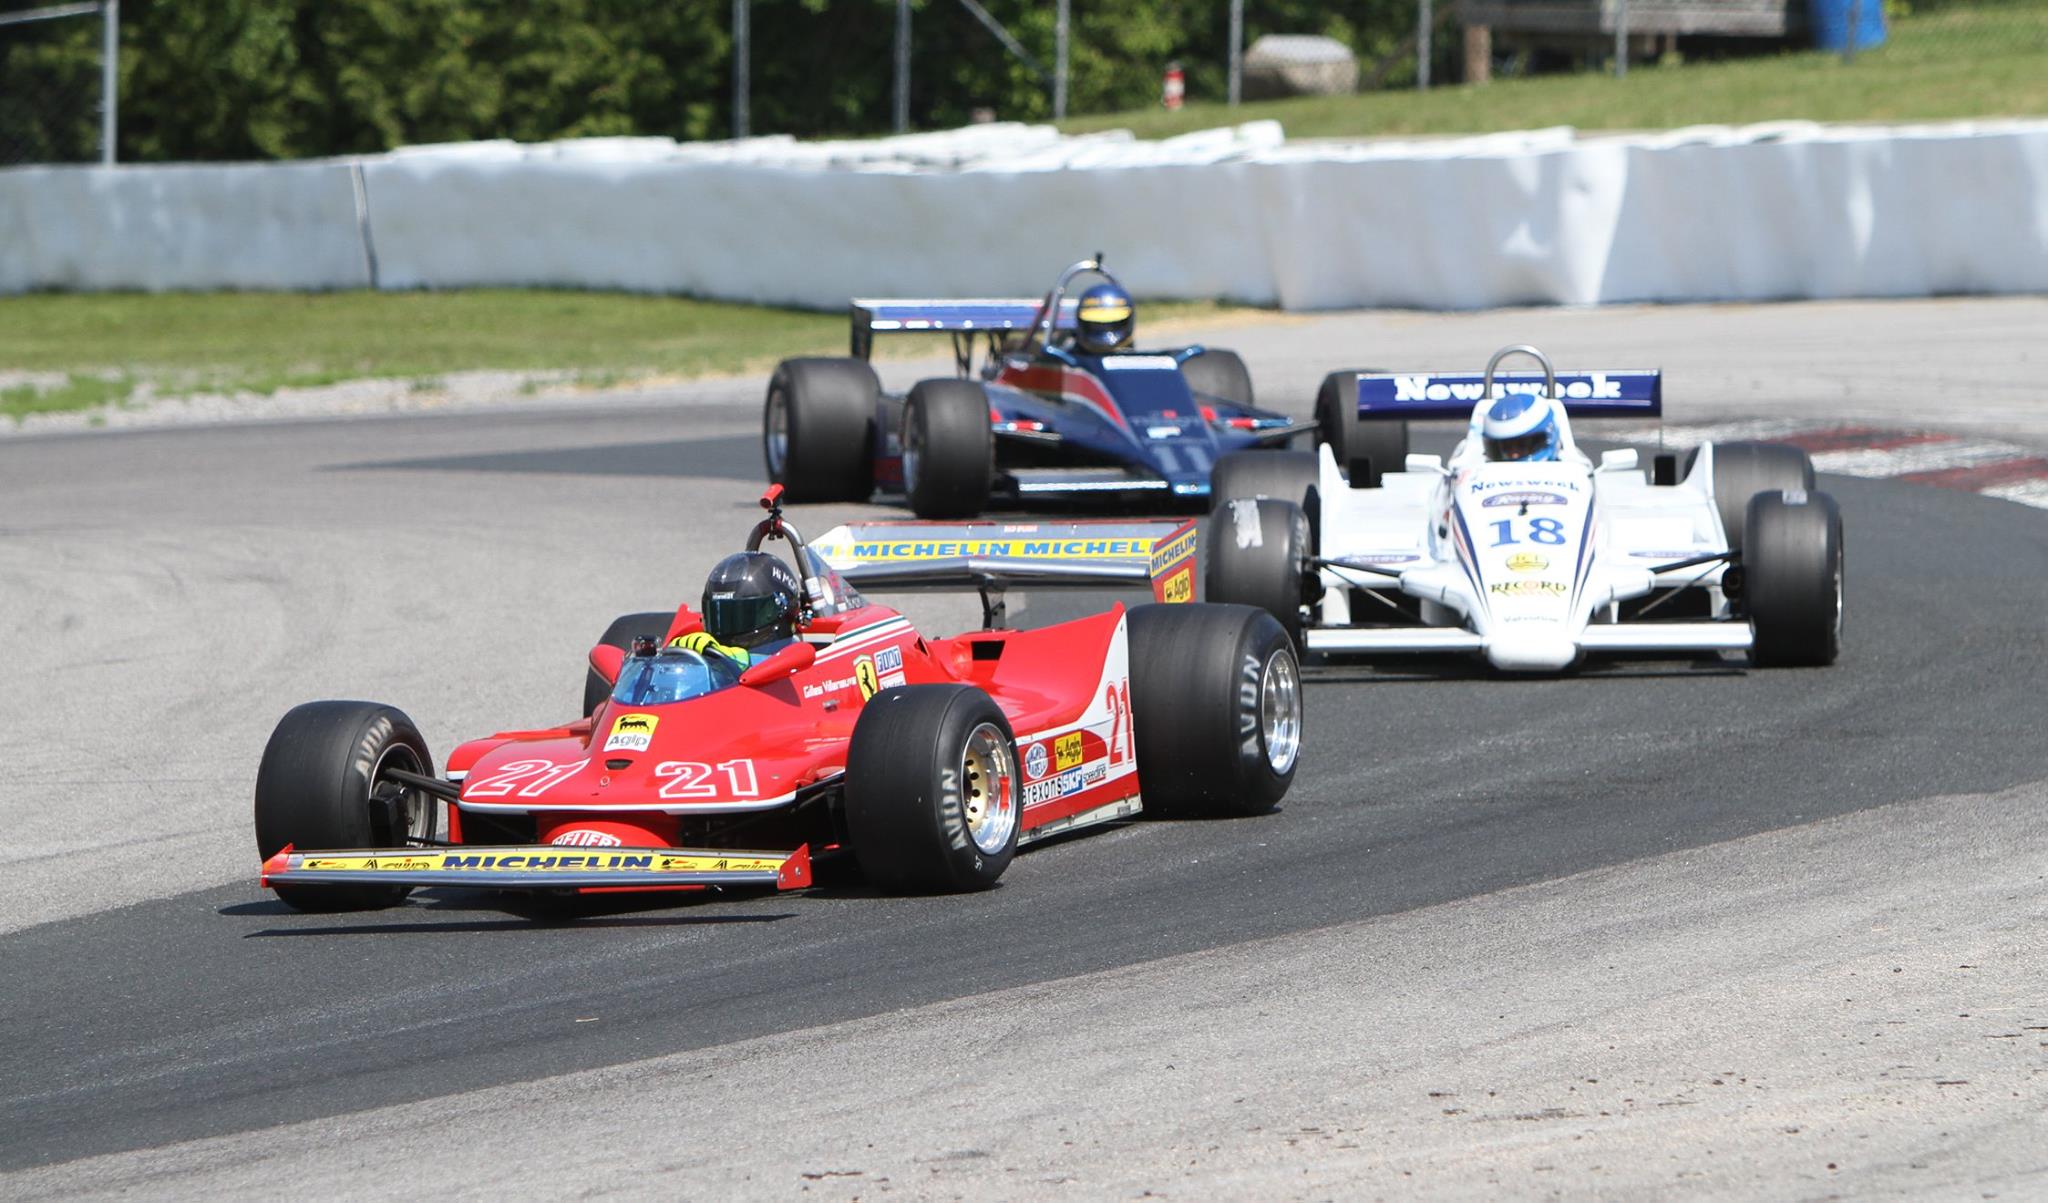 Masters Formula One racing headlines at the Sports Car Grand Prix at Candian Tire Motorsport Park